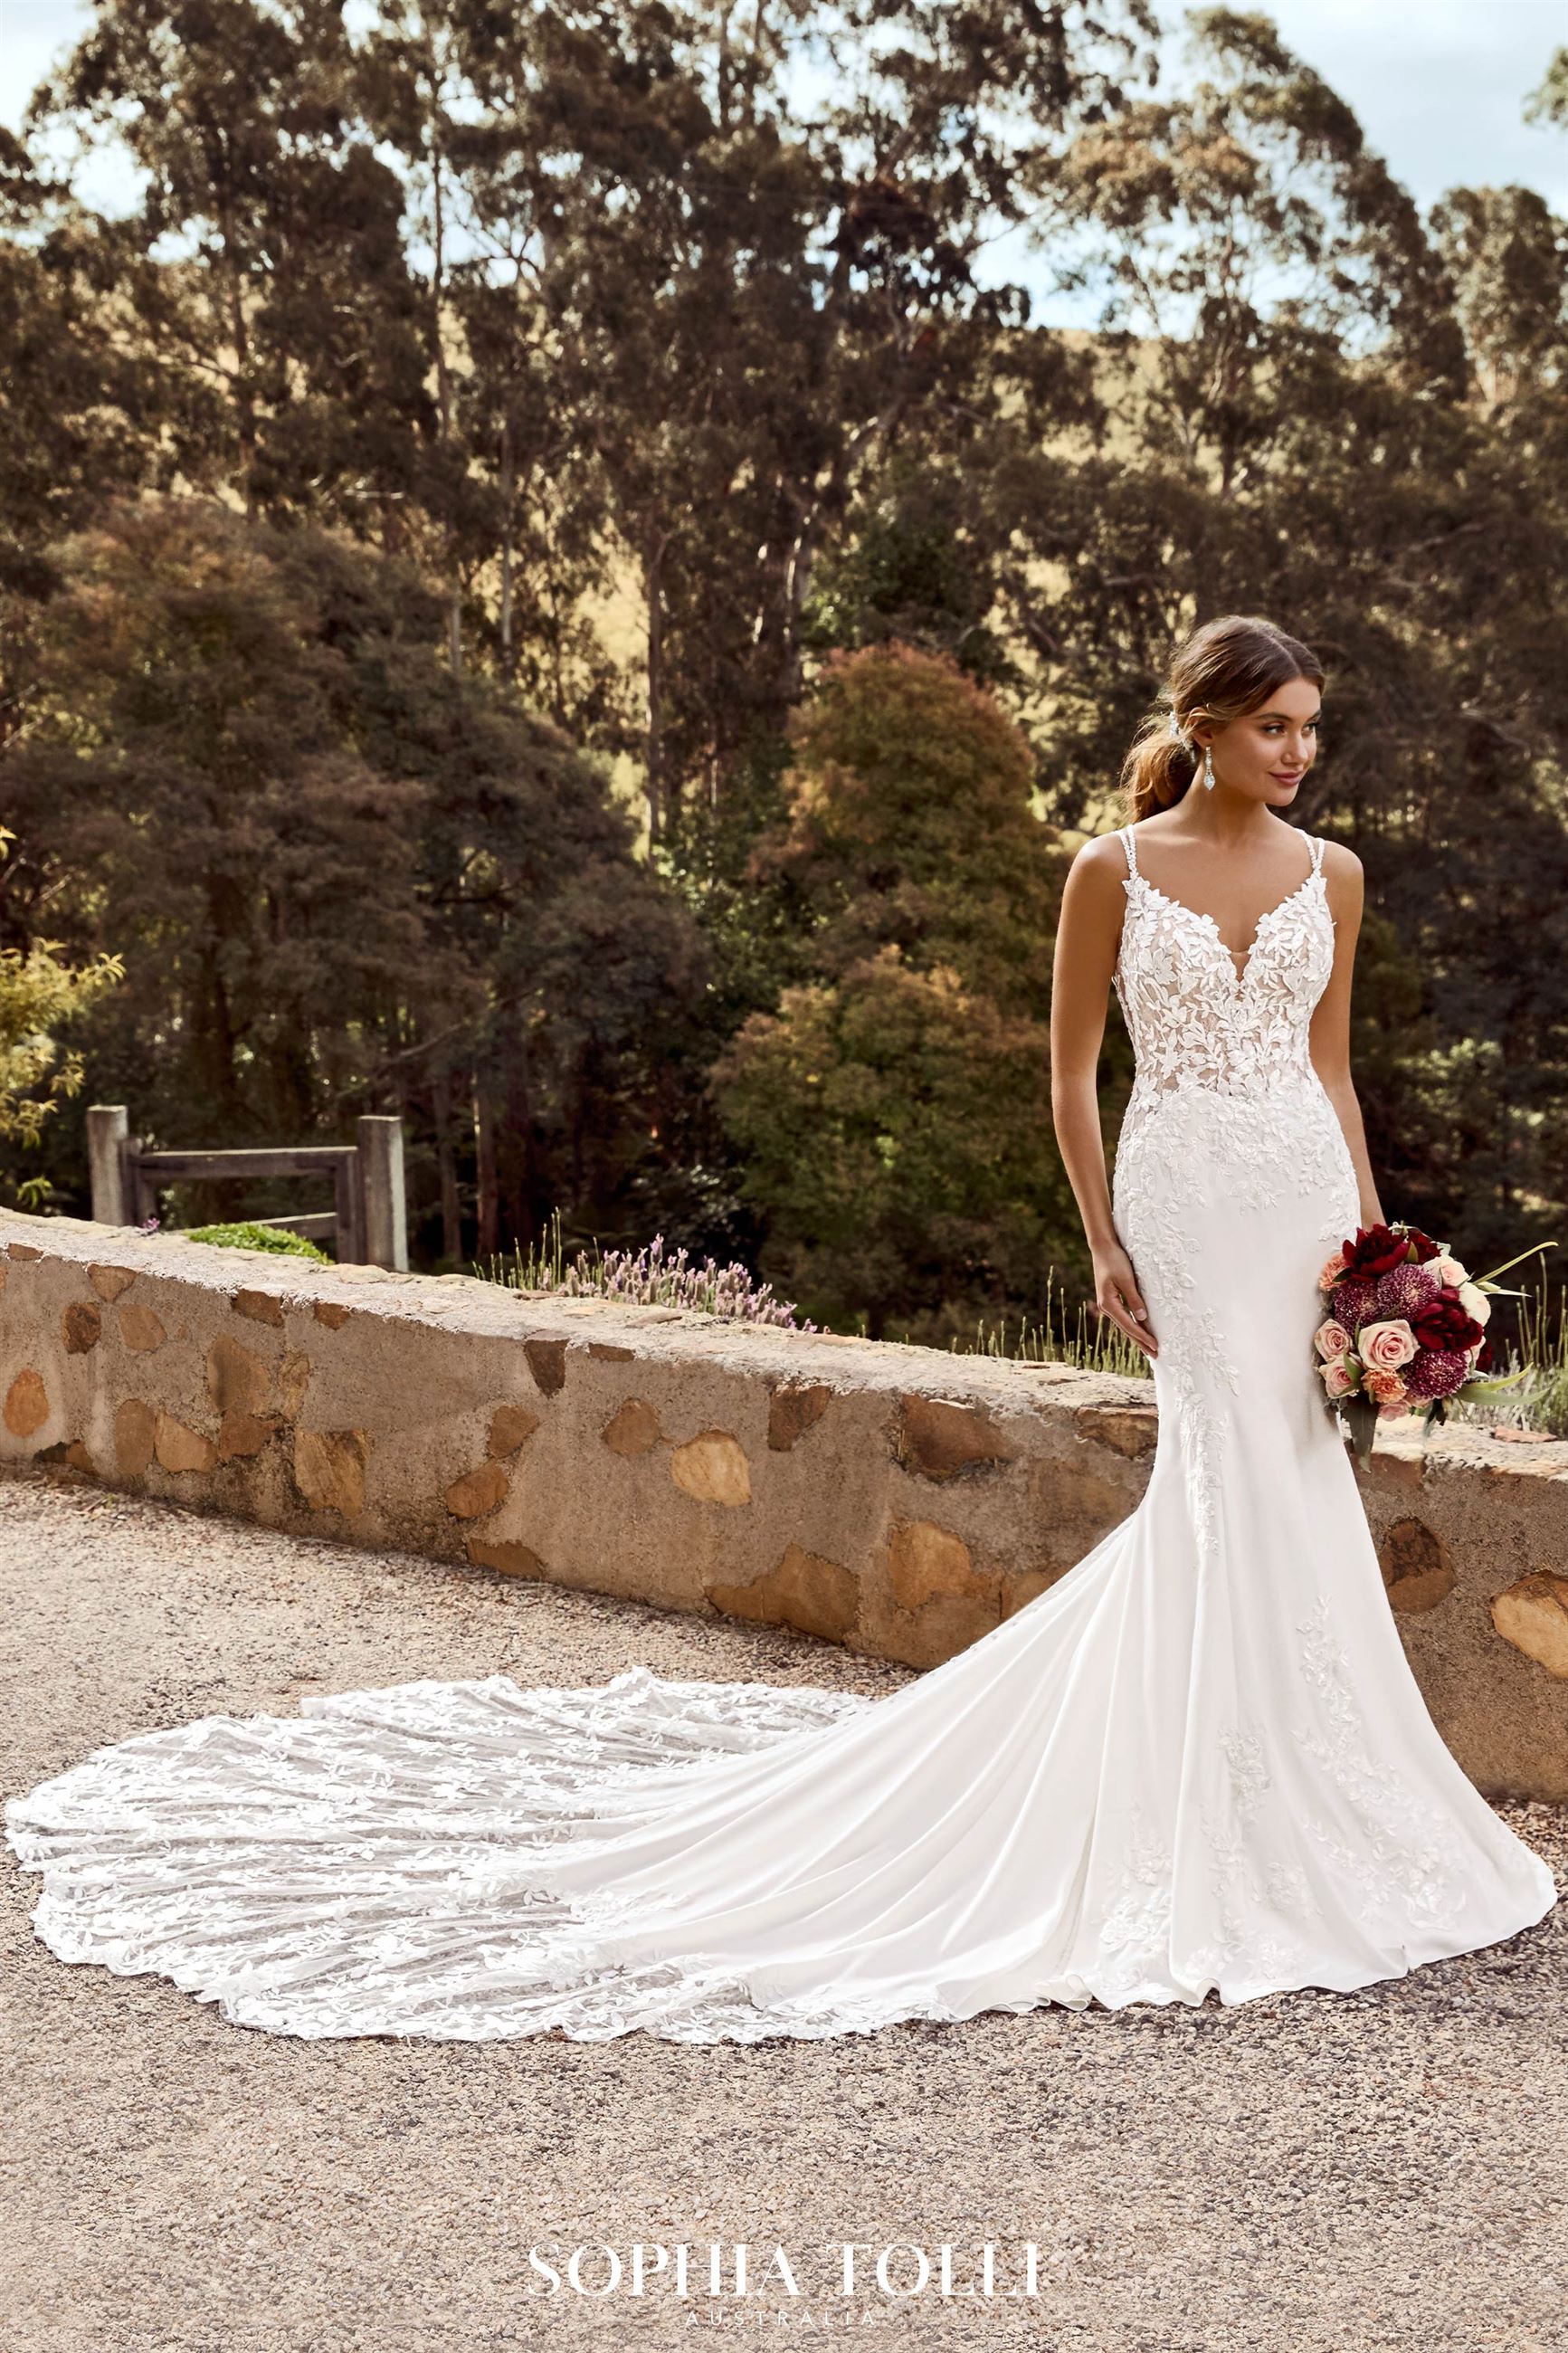 Floral Crepe Wedding Dress with Lace Train | Sophia Tolli